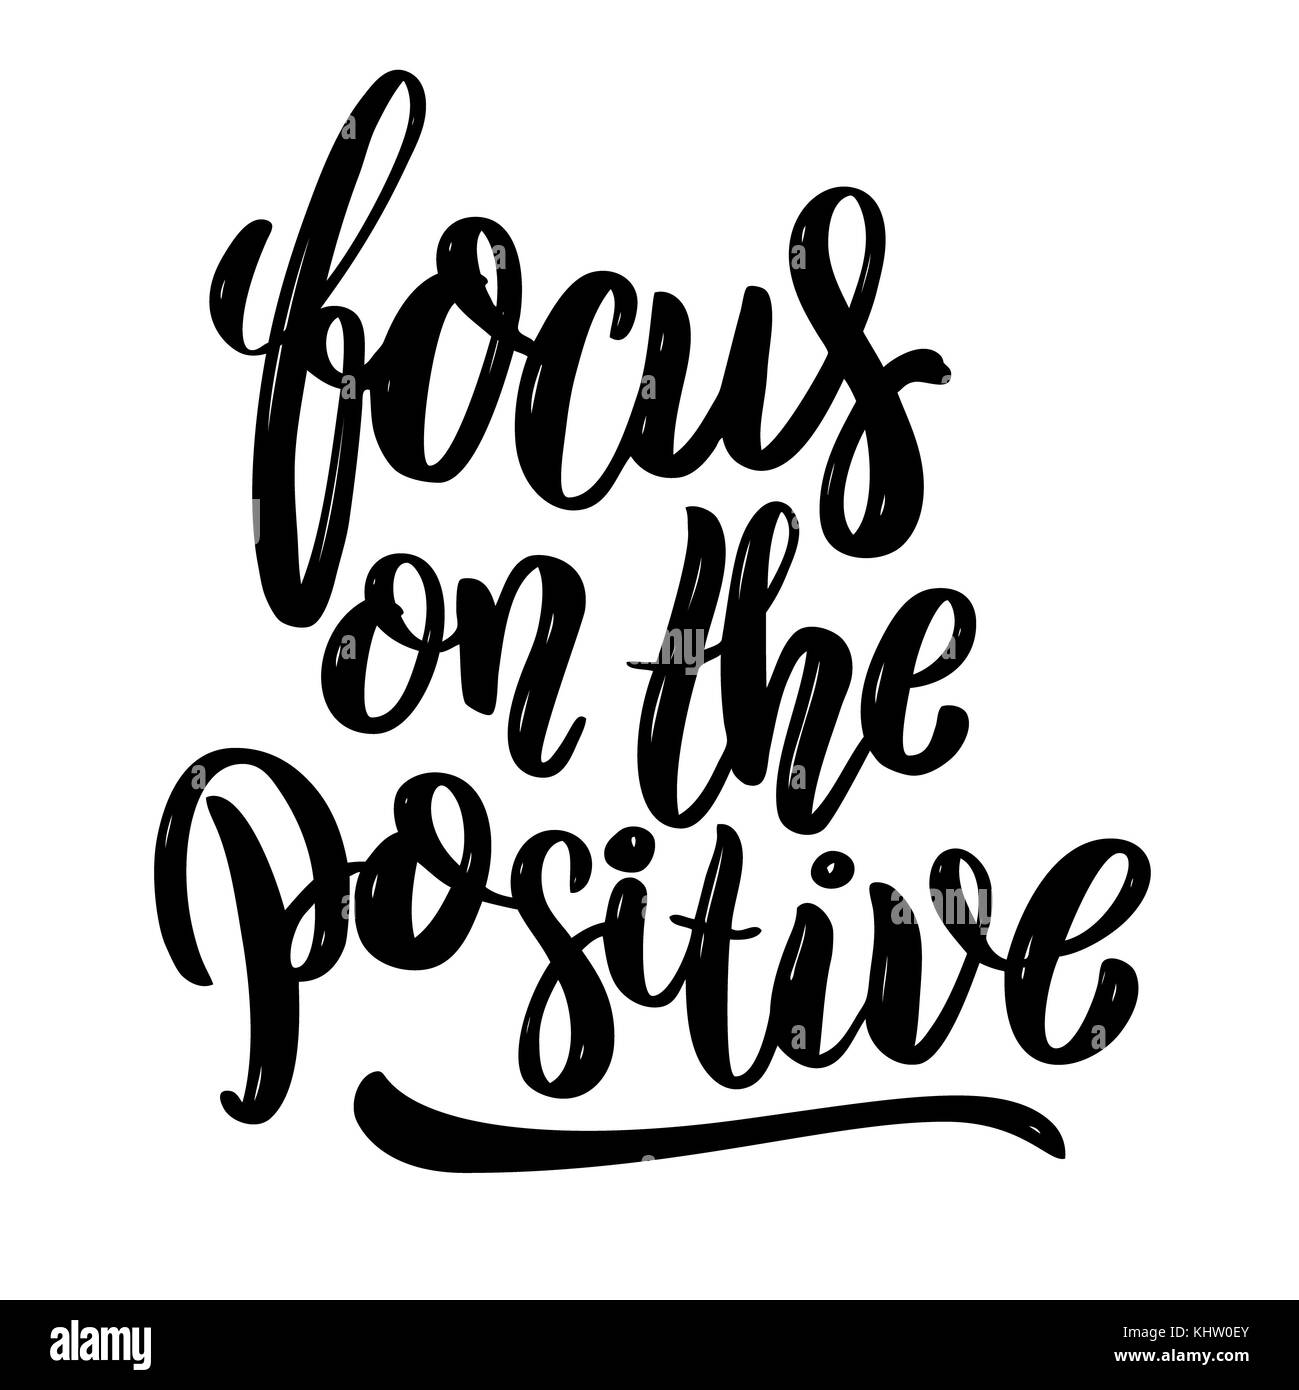 Focus on the positive .Hand drawn motivation lettering quote. Design element for poster, banner, greeting card. Vector illustration Stock Photo